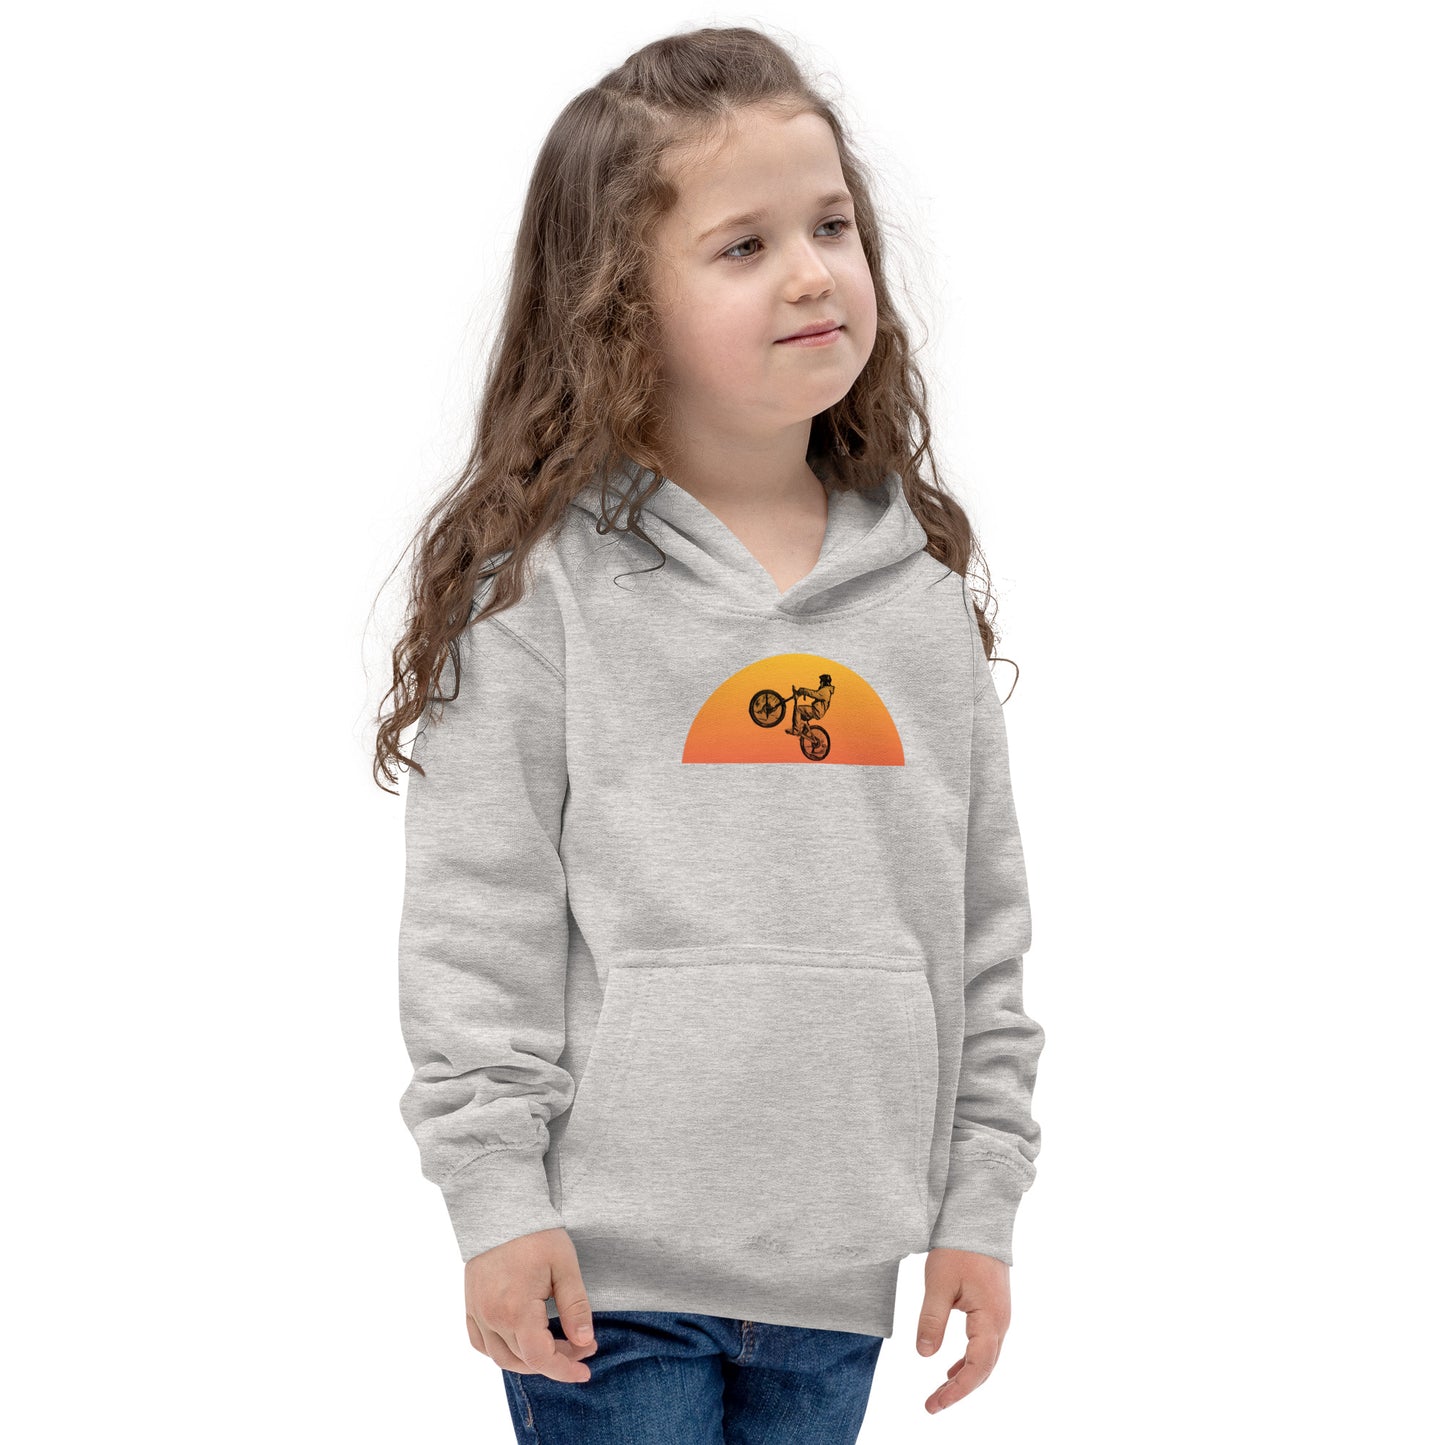 Kids are way cooler than adults/Wheelieing off into the sunset (hoodie)